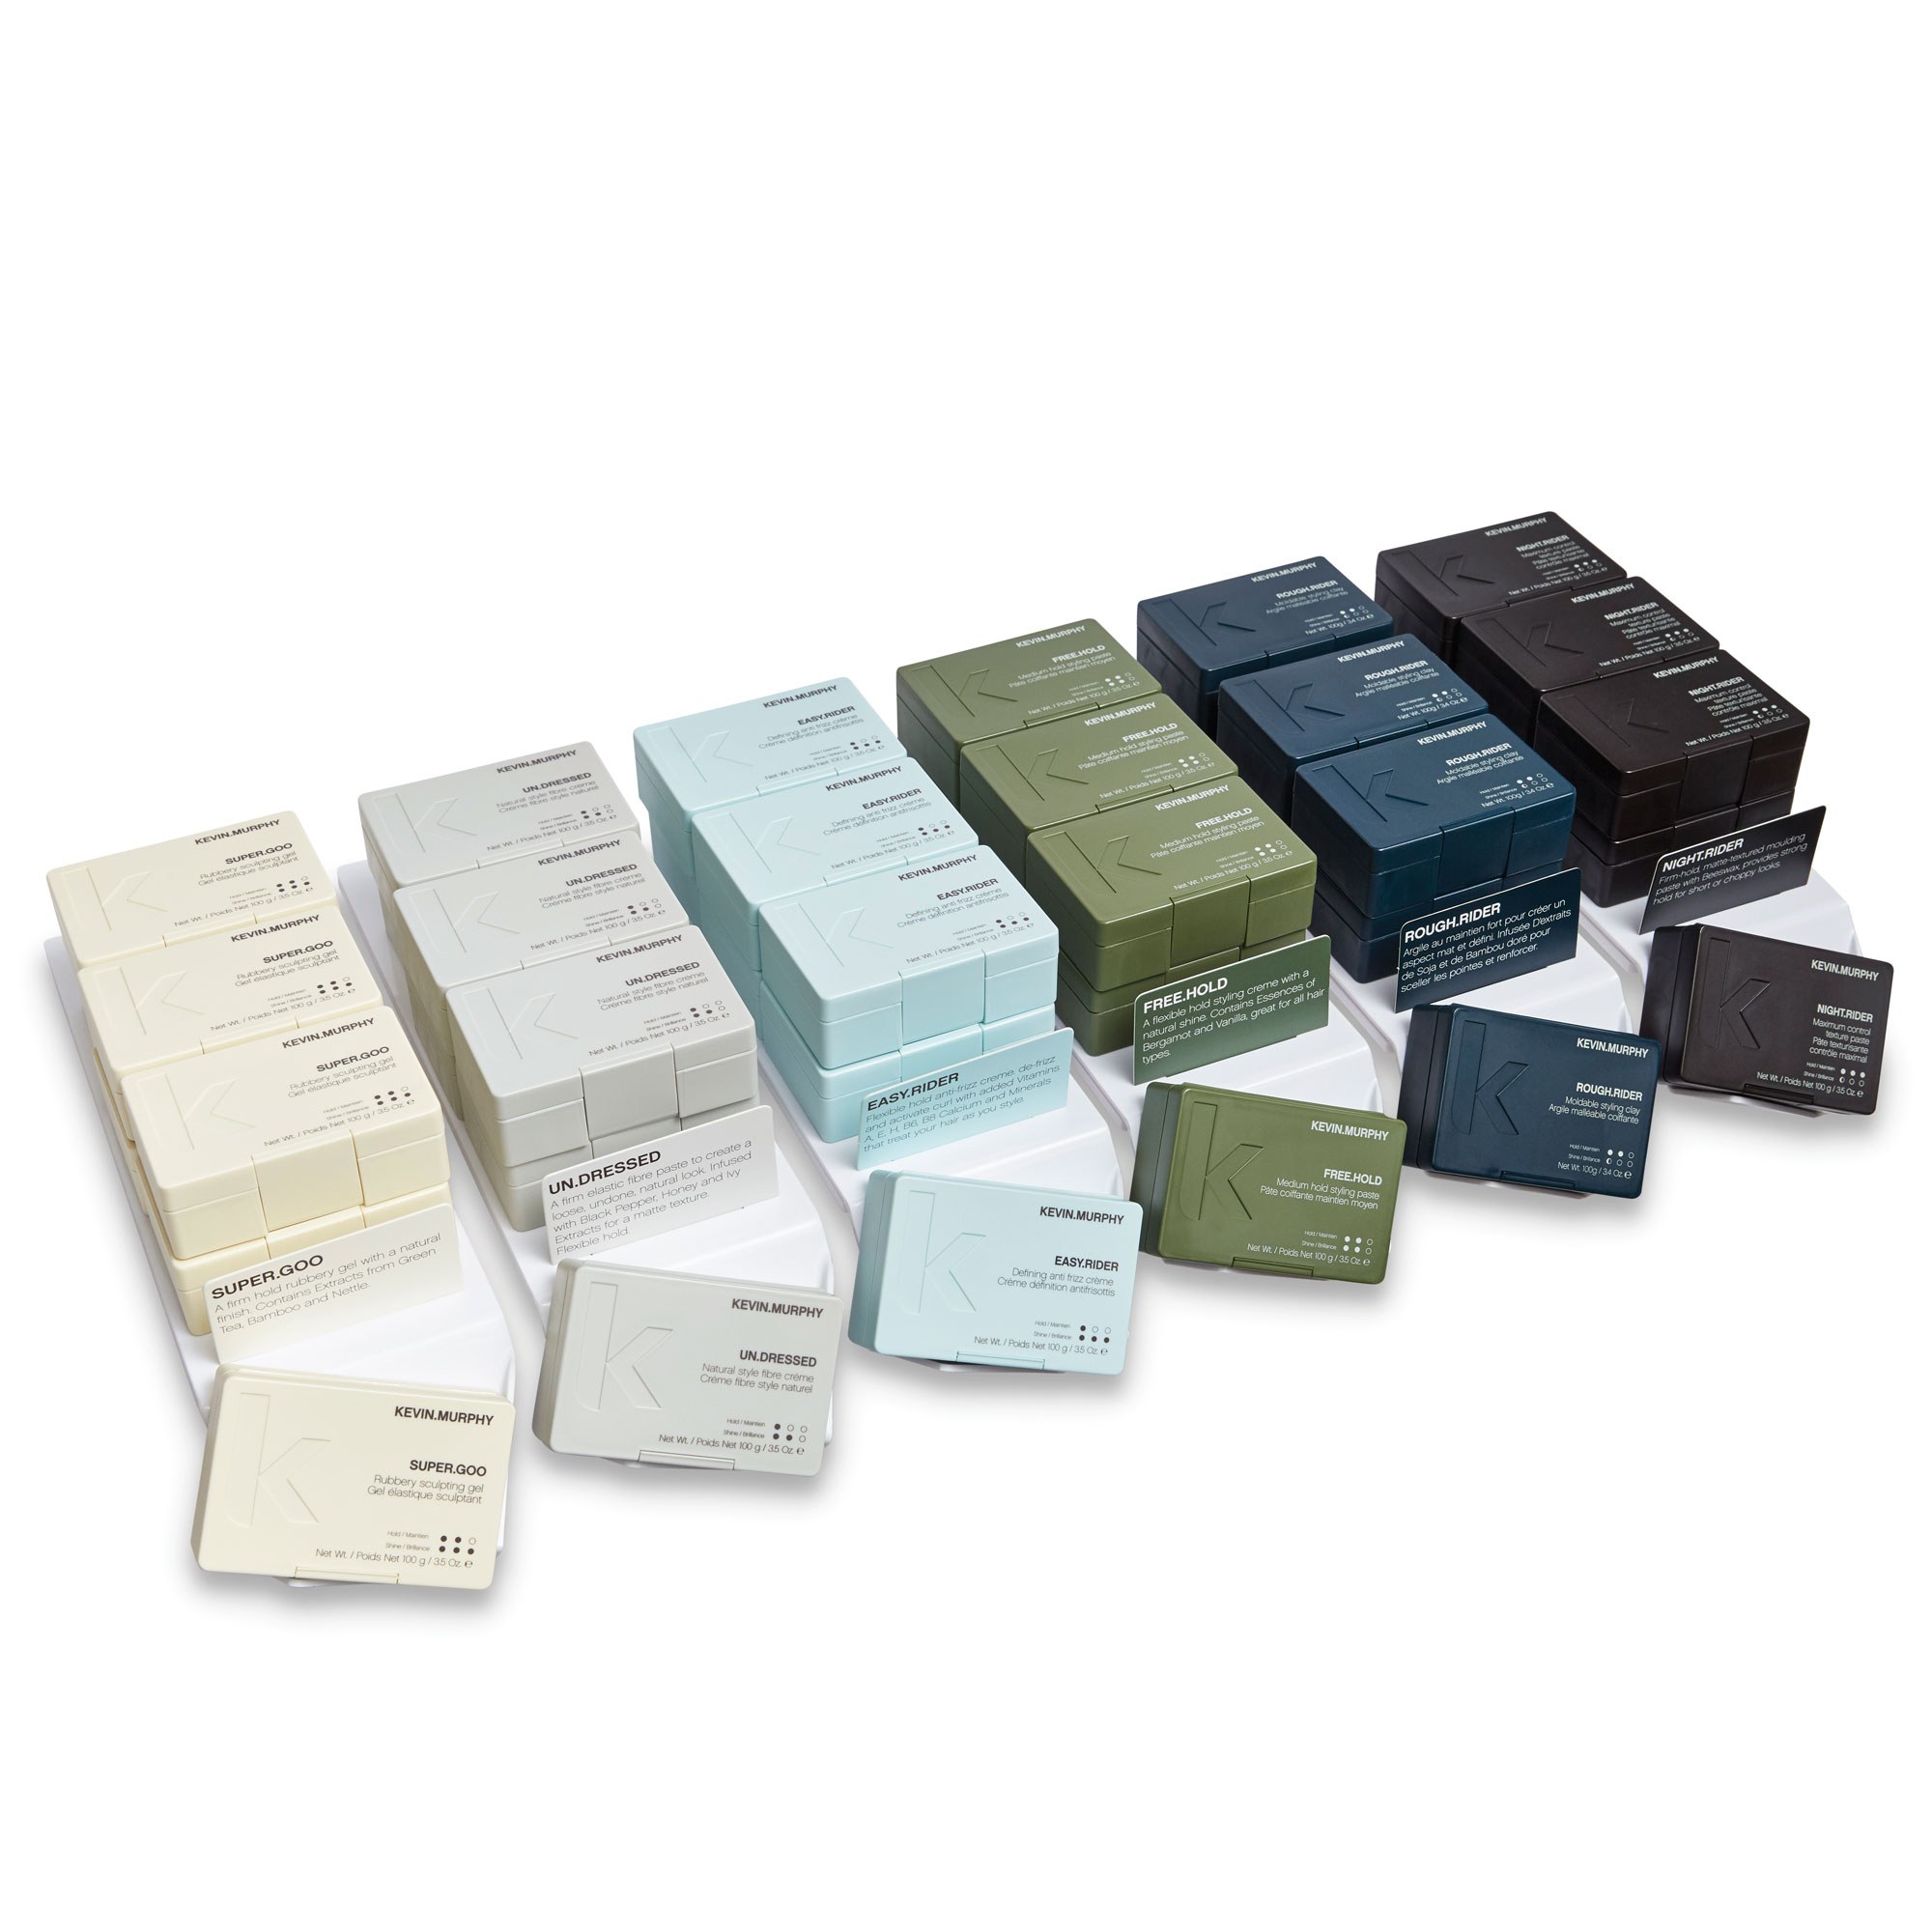 KEVIN.MURPHY Displays: Counter Culture Tub Glorifier - 6 Trays in 1 Unit